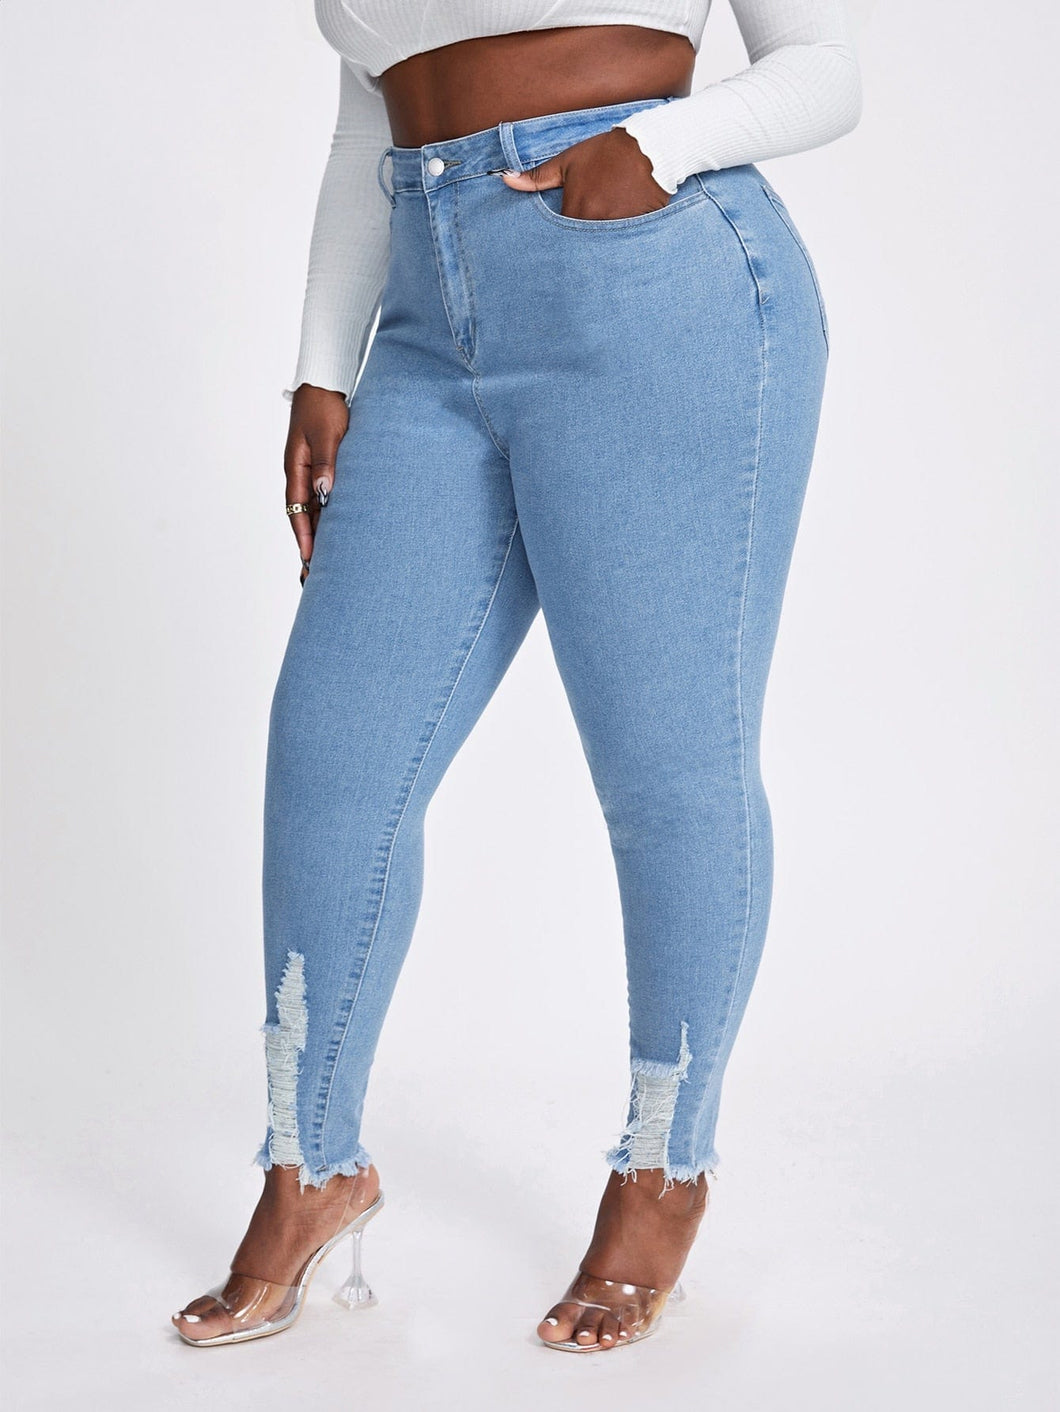 Love God. Store Large Size Jeans SXY Large High Waisted Light Wash Ripped Raw Hem Skinny Jeans price